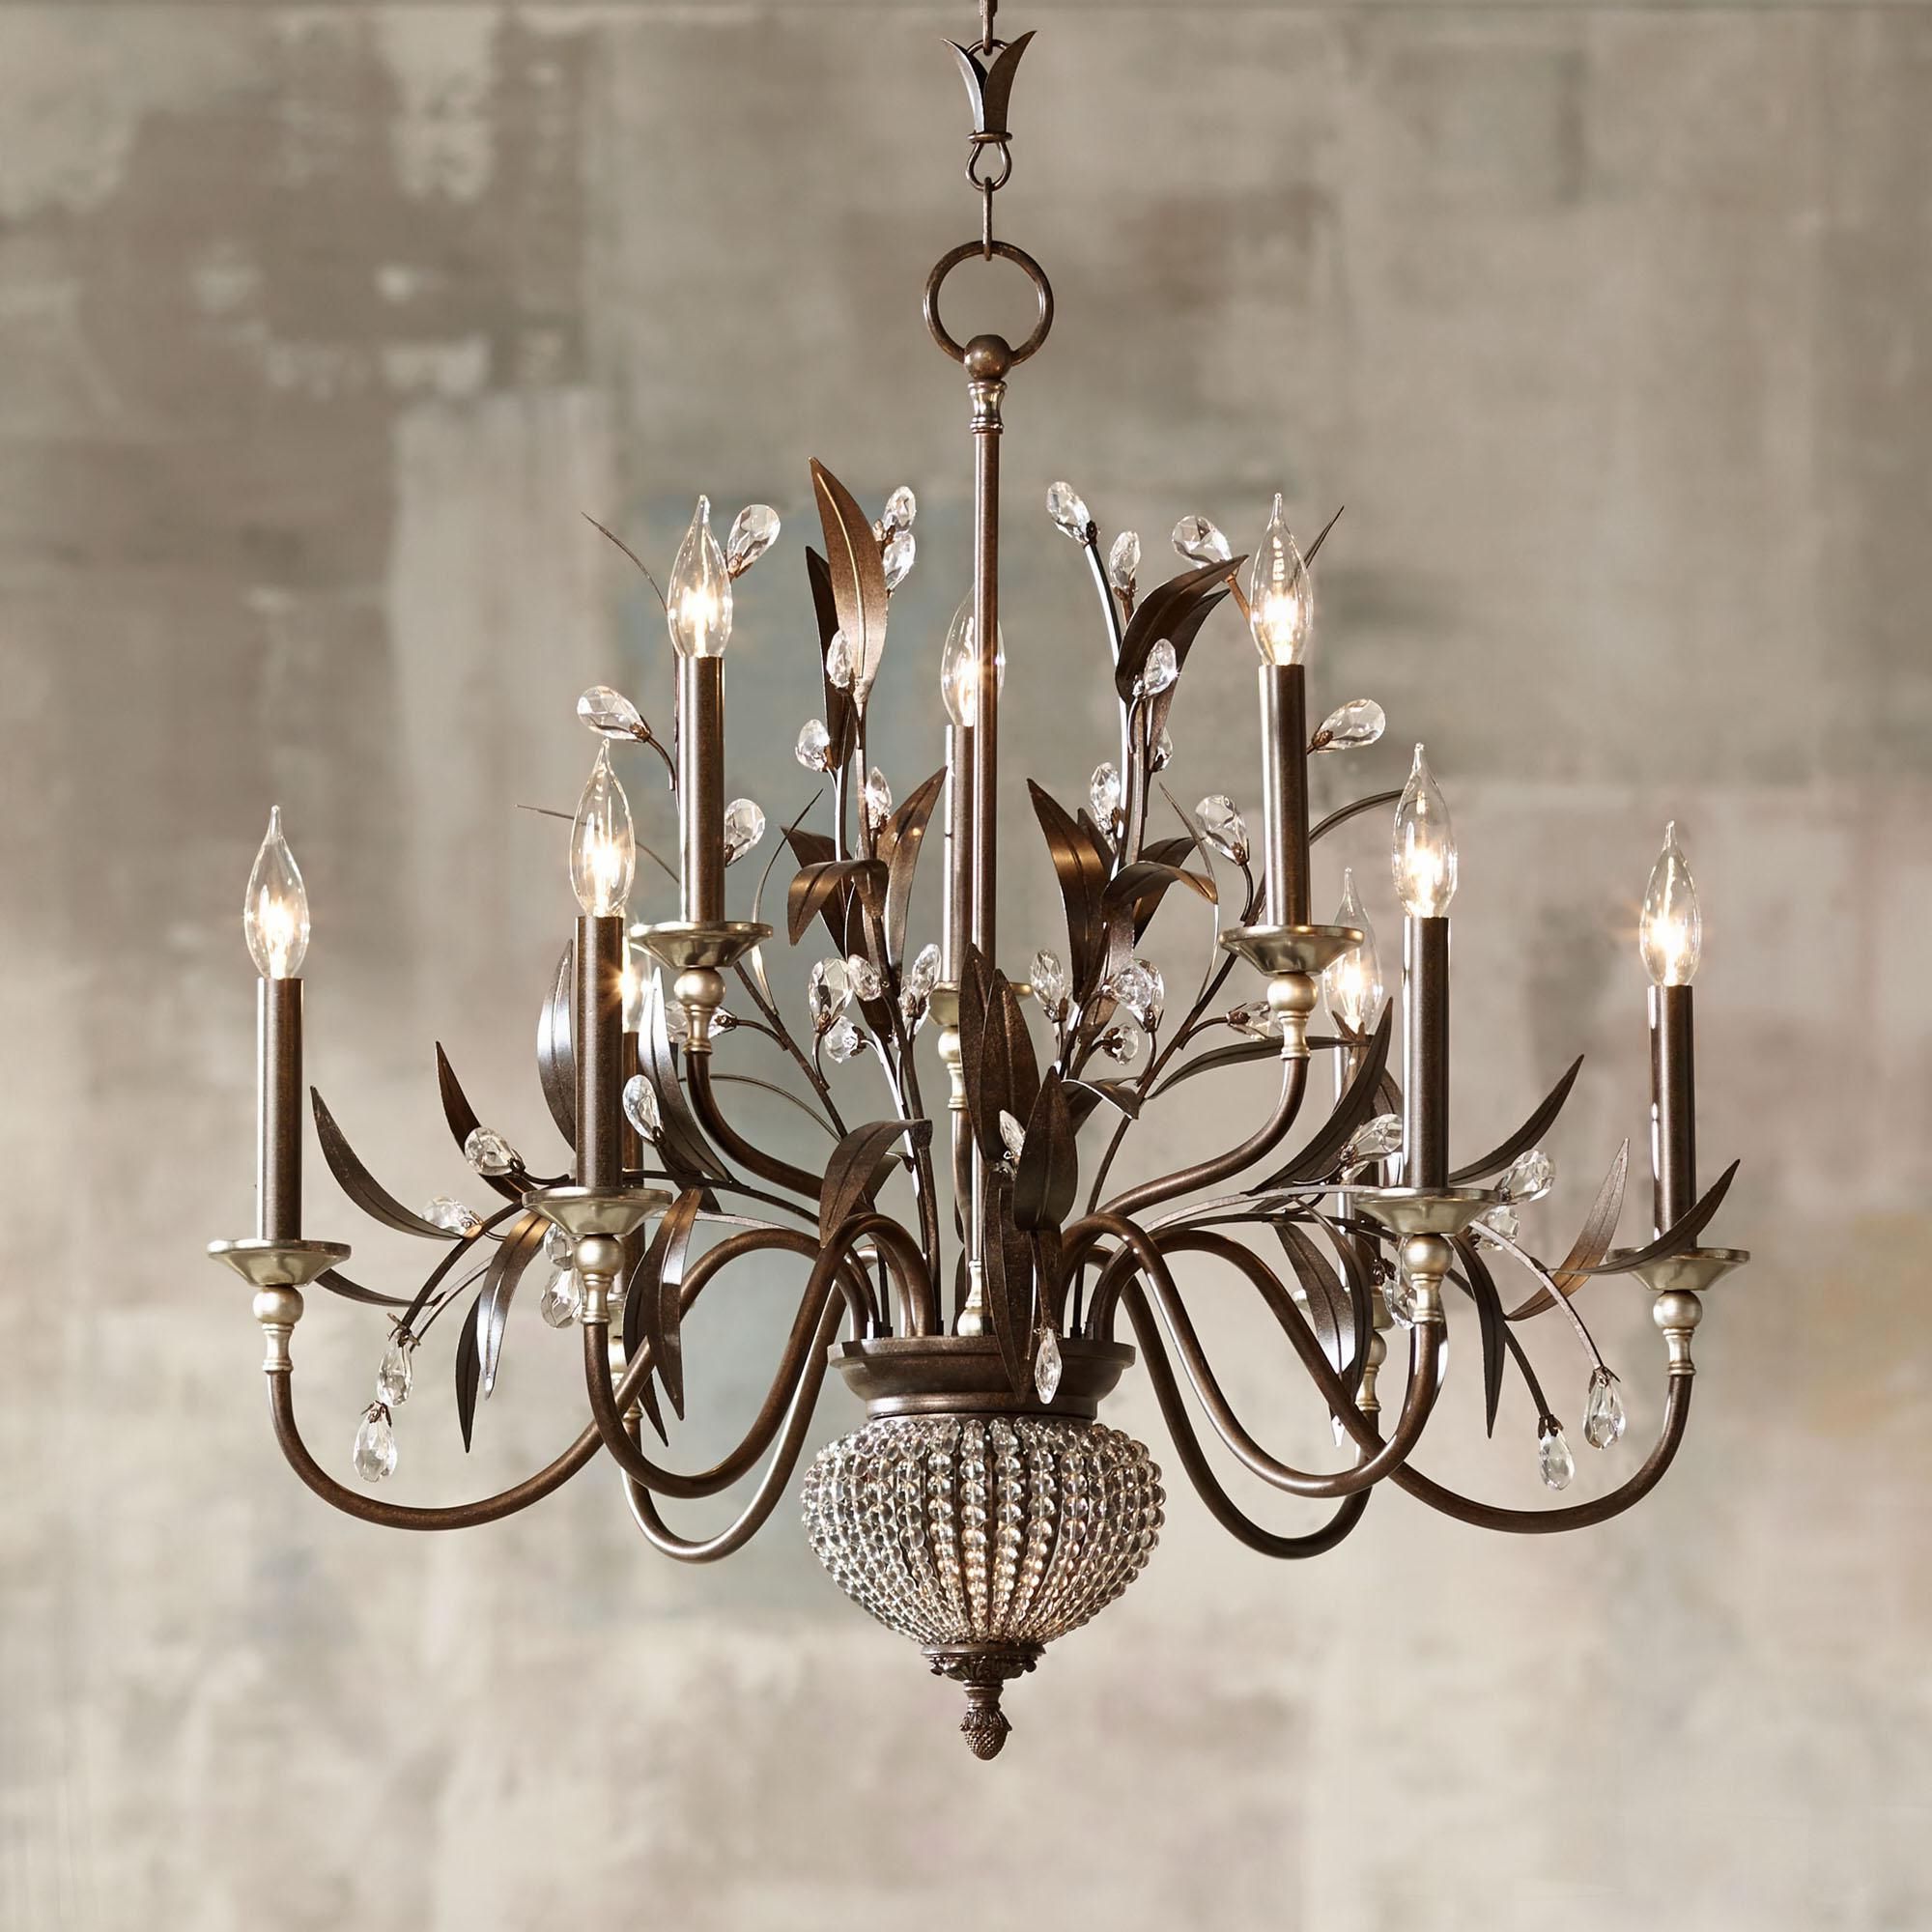 Most Recent Blanchette 5 Light Candle Style Chandeliers Inside Cristal De Lisbon Collection 32" Wide Two Tier Chandelier In (View 21 of 25)